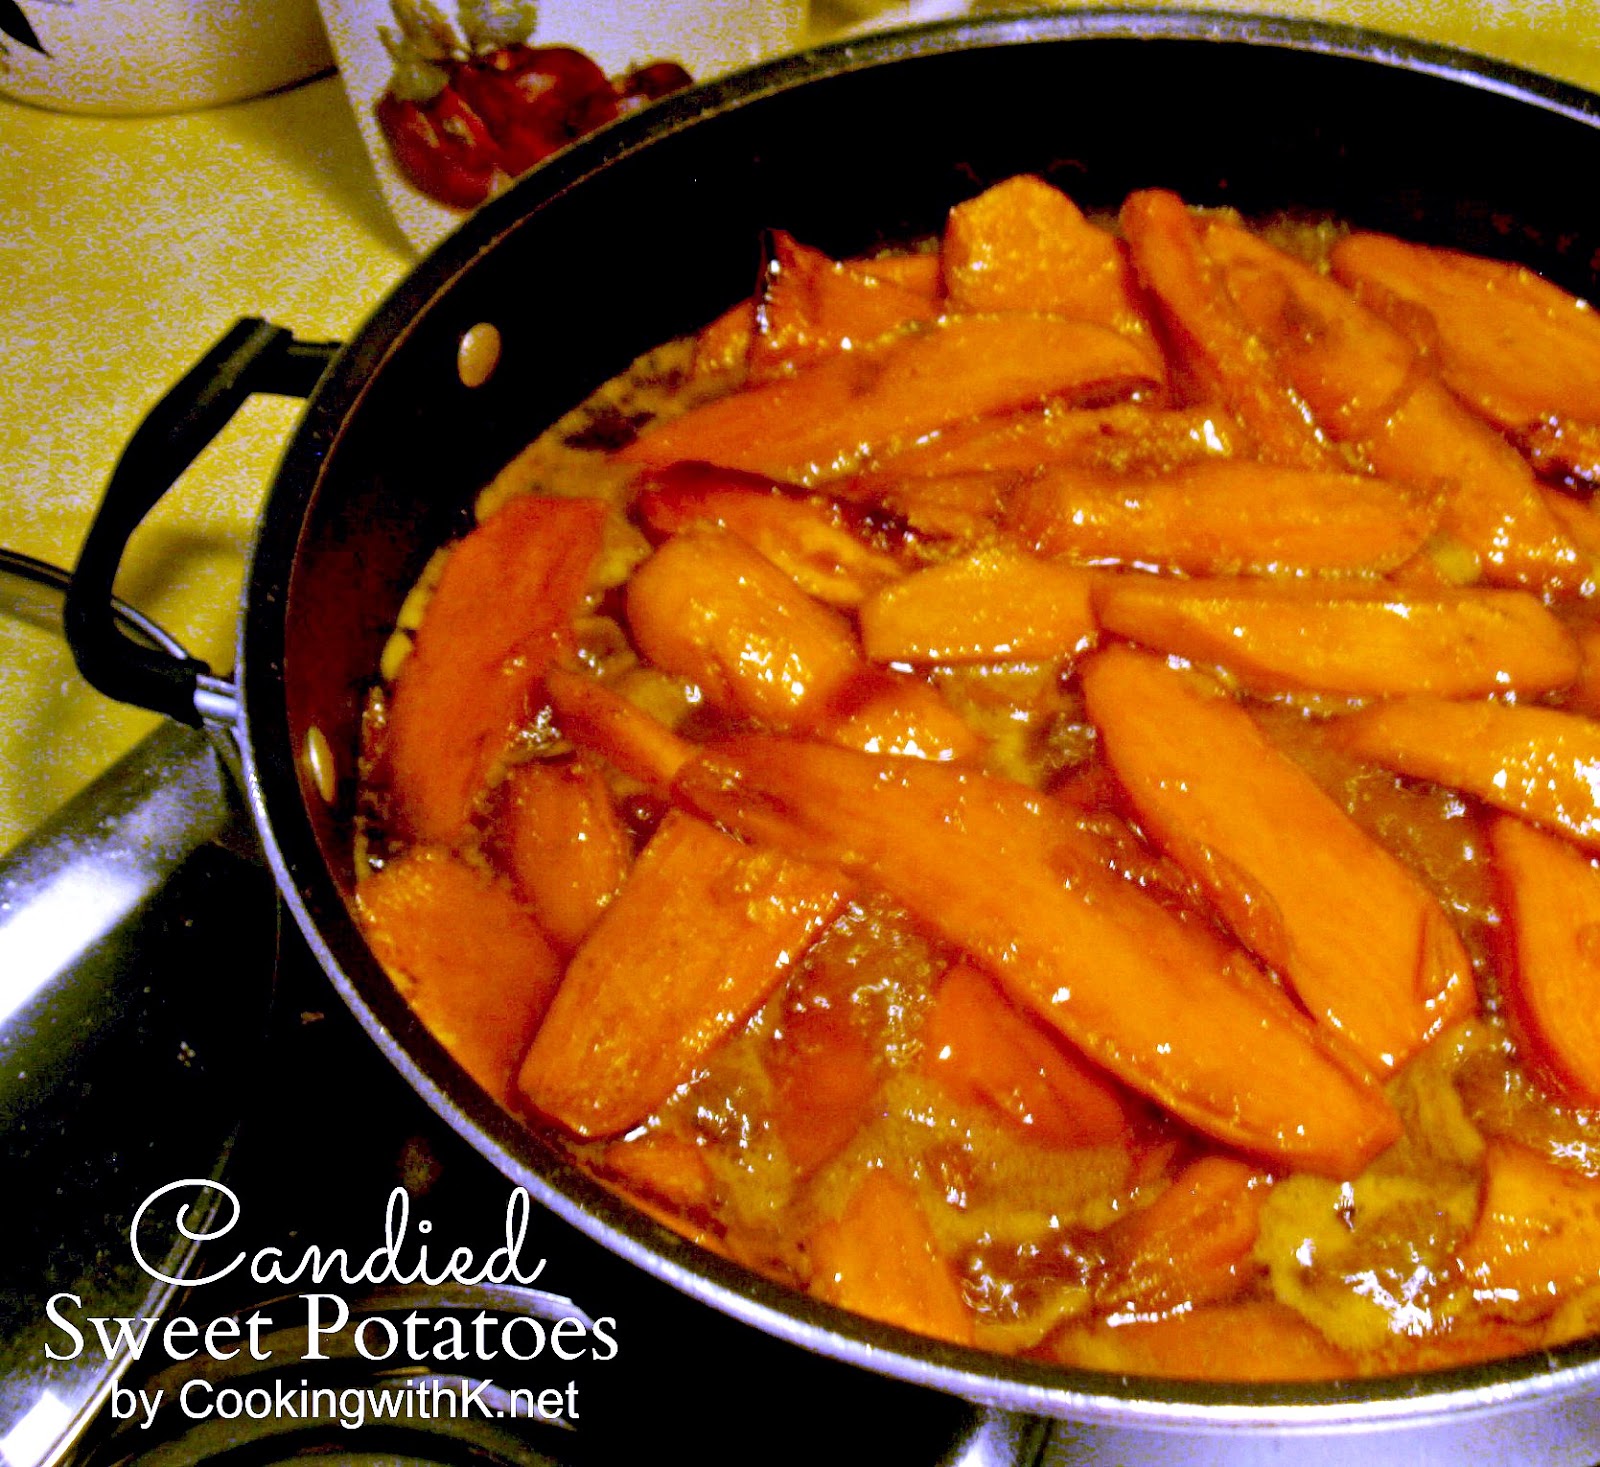 The Very Best Southern Candied Sweet Potatoes, slices of sweet potatoes covered with a buttery brown sugar mixture and cooked until the edges are caramelized.  A side dish that graces tables in the south especially around the holidays.